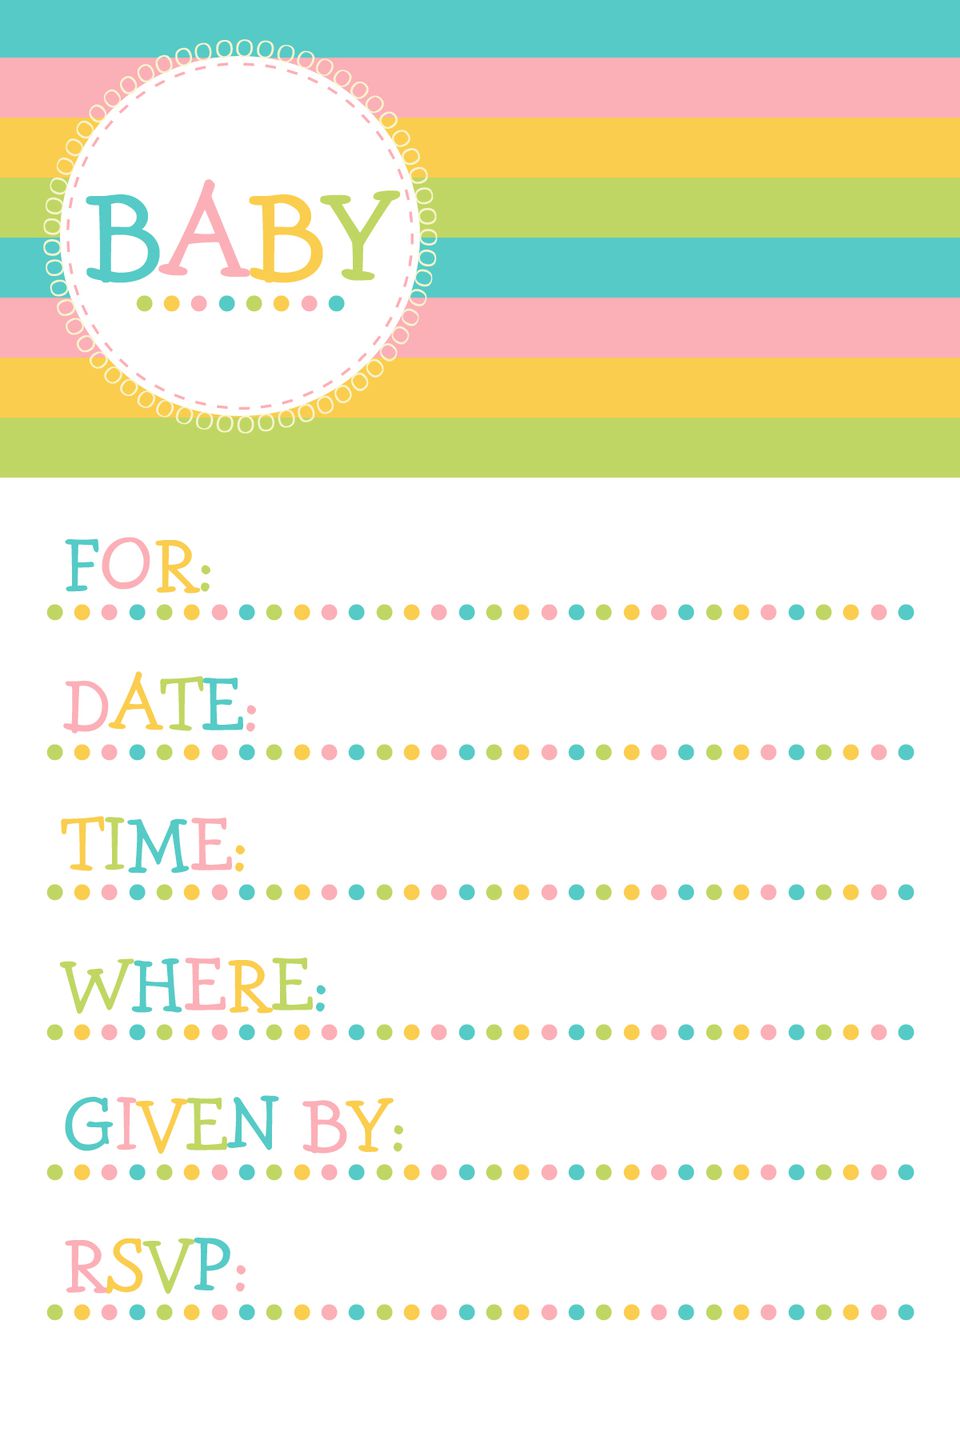 Full Size of Baby Shower:unique Baby Shower Themes Homemade Baby Shower Decorations Baby Shower Invitations Baby Girl Themes Elegant Baby Shower All Star Baby Shower Unique Baby Shower Decorations Girl Baby Shower Decorations